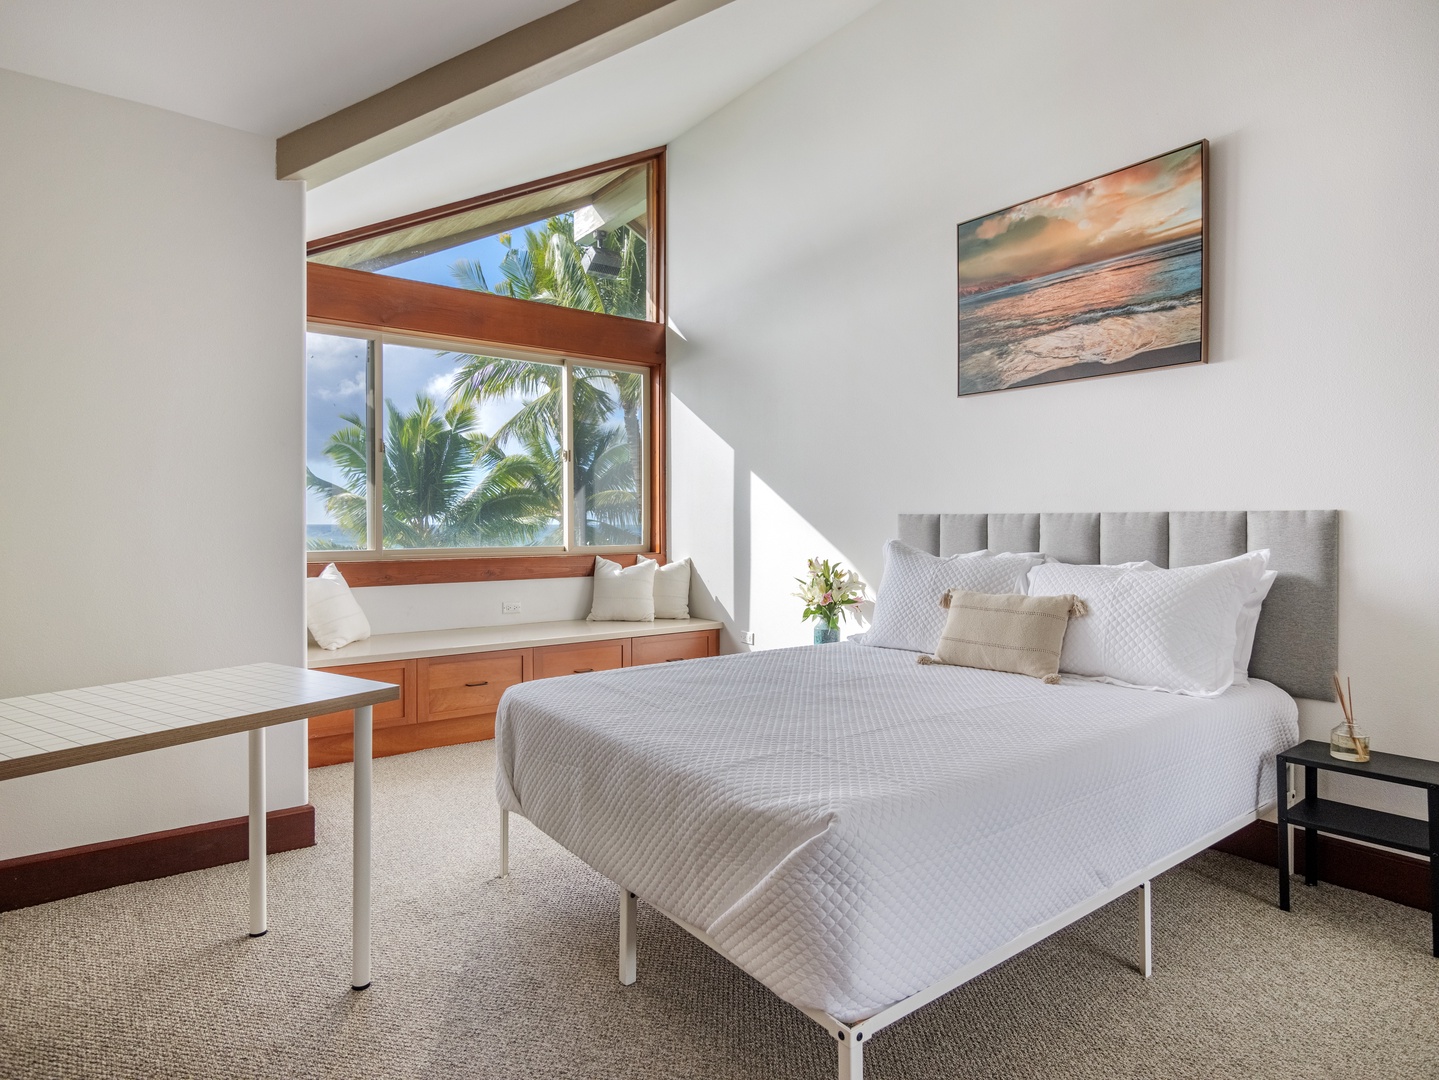 Waianae Vacation Rentals, Konishiki Beachhouse - Guest suite with airy ambiance and a nice window seat.